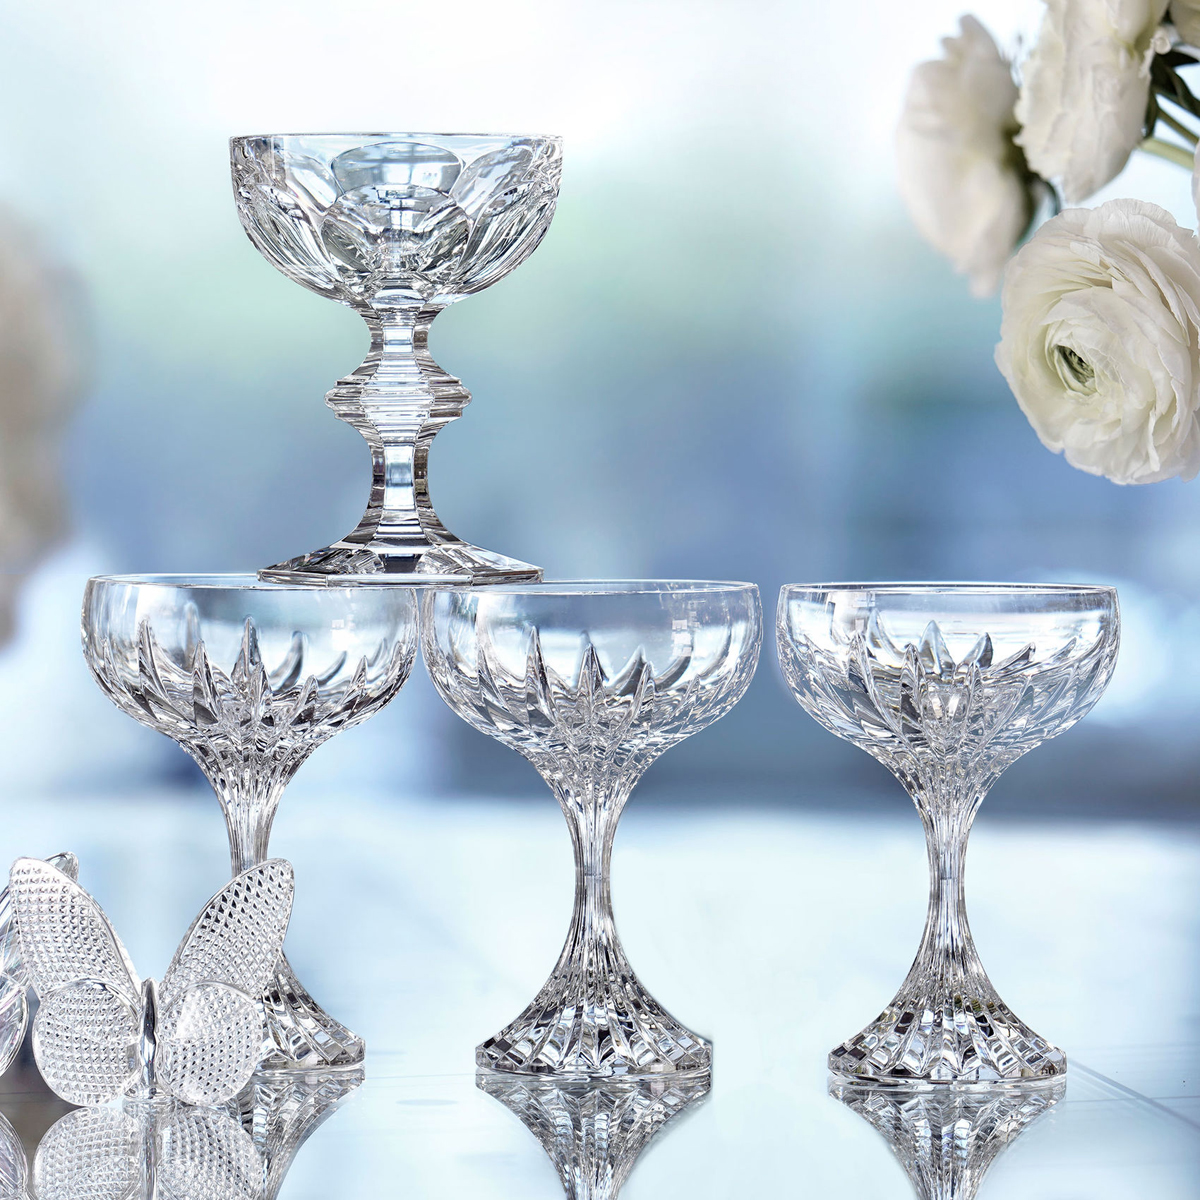 Baccarat Crystal, Harcourt 1841 Cocktail Saucer Champagne Coupe, Pair